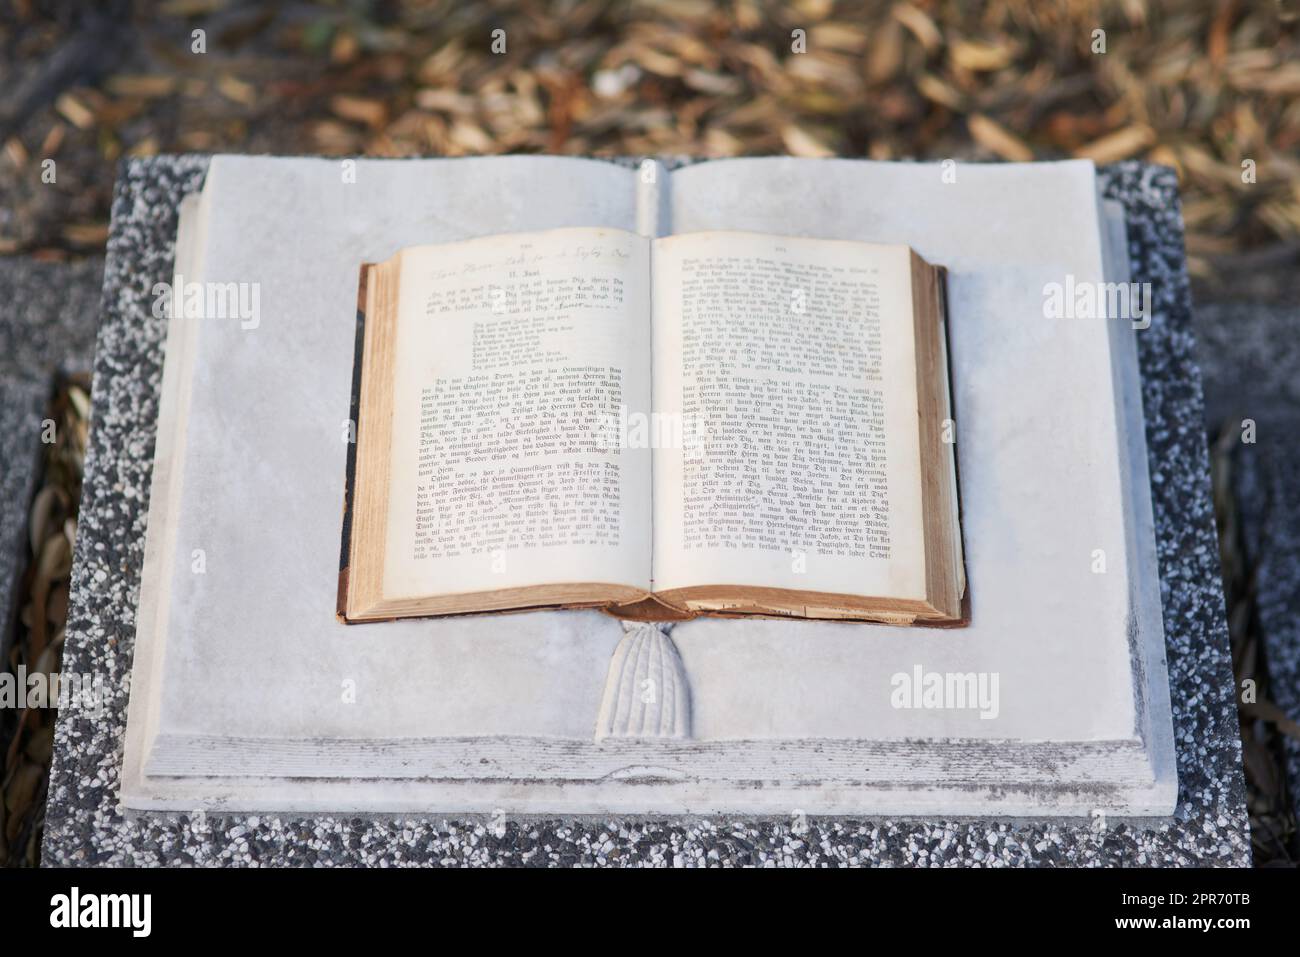 Eternal blessings from the bible. Shot of a gravestone in a cemetery. Stock Photo